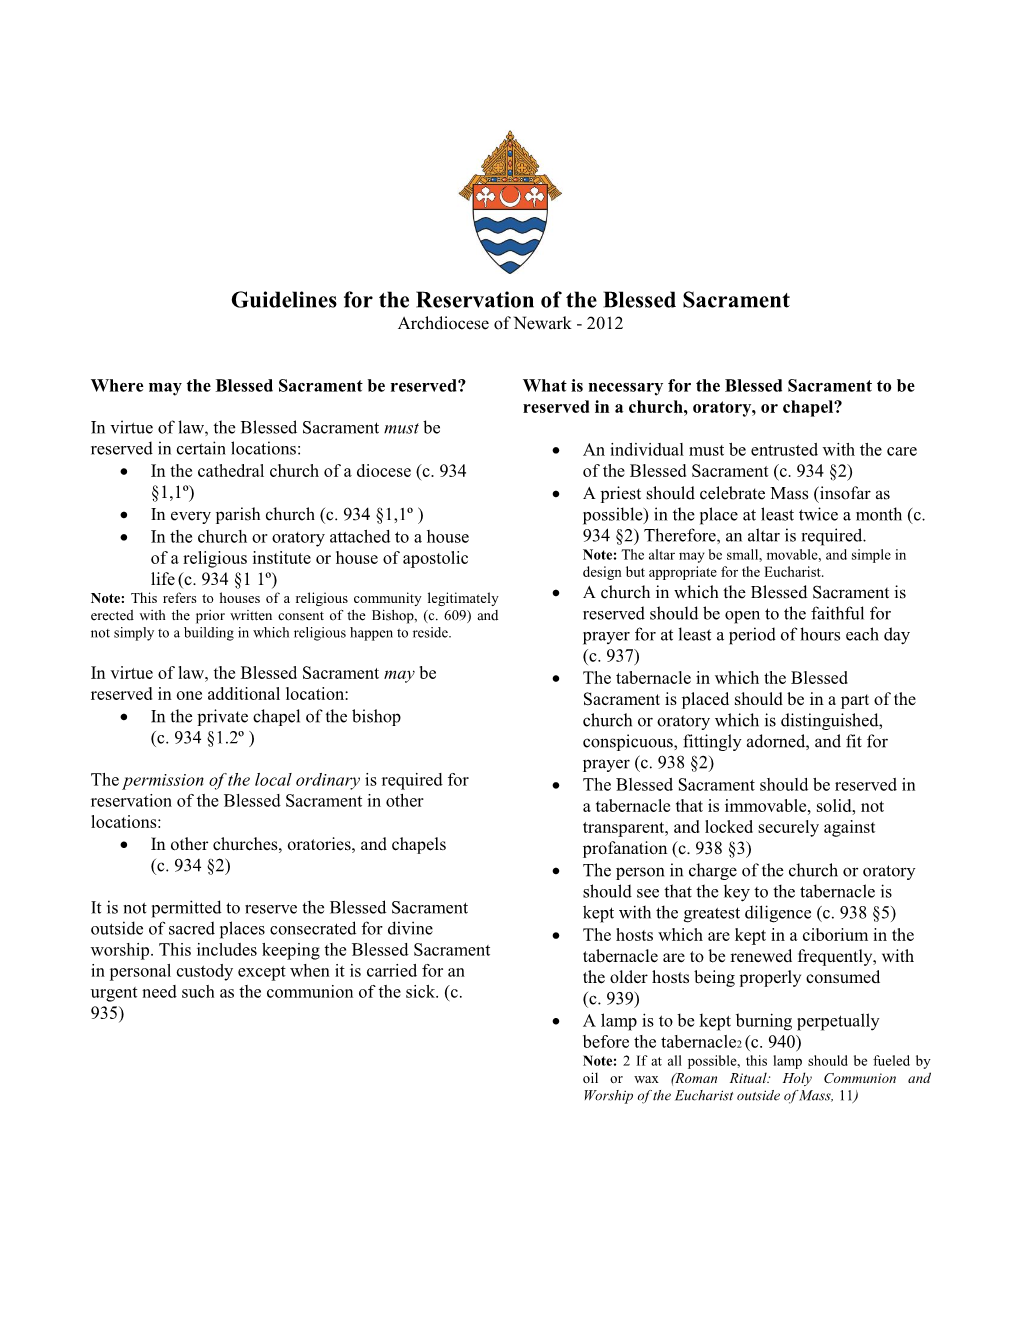 Guidelines for the Reservation of the Blessed Sacrament Archdiocese of Newark - 2012